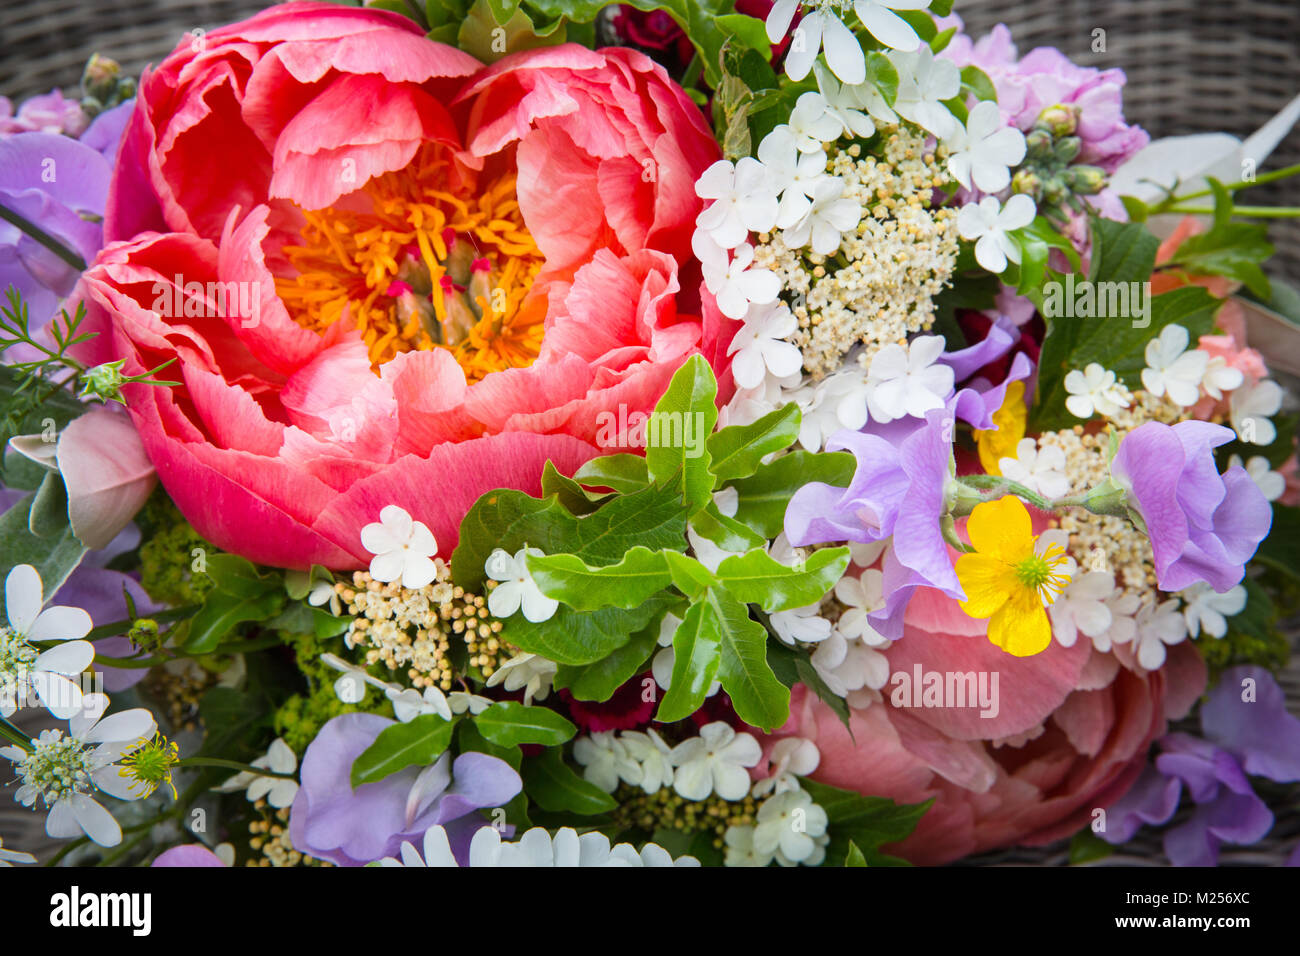 Colourful flower bouquet with peony rose, close up Stock Photo